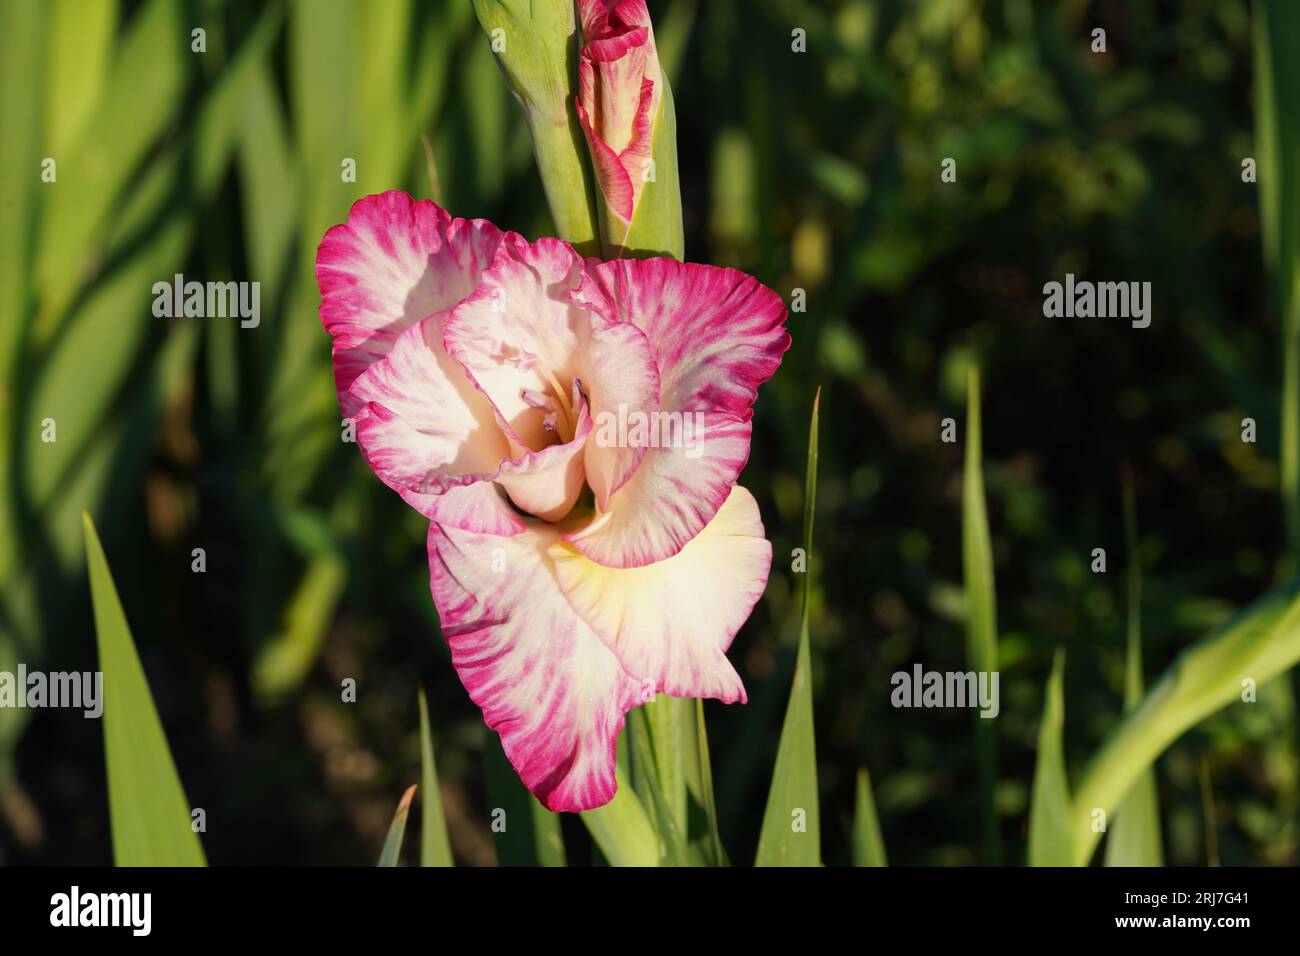 Gladiolus hybrid flowers with bicolor petals of fuchsia and white colors growing  in natural condition on a field. Stock Photo